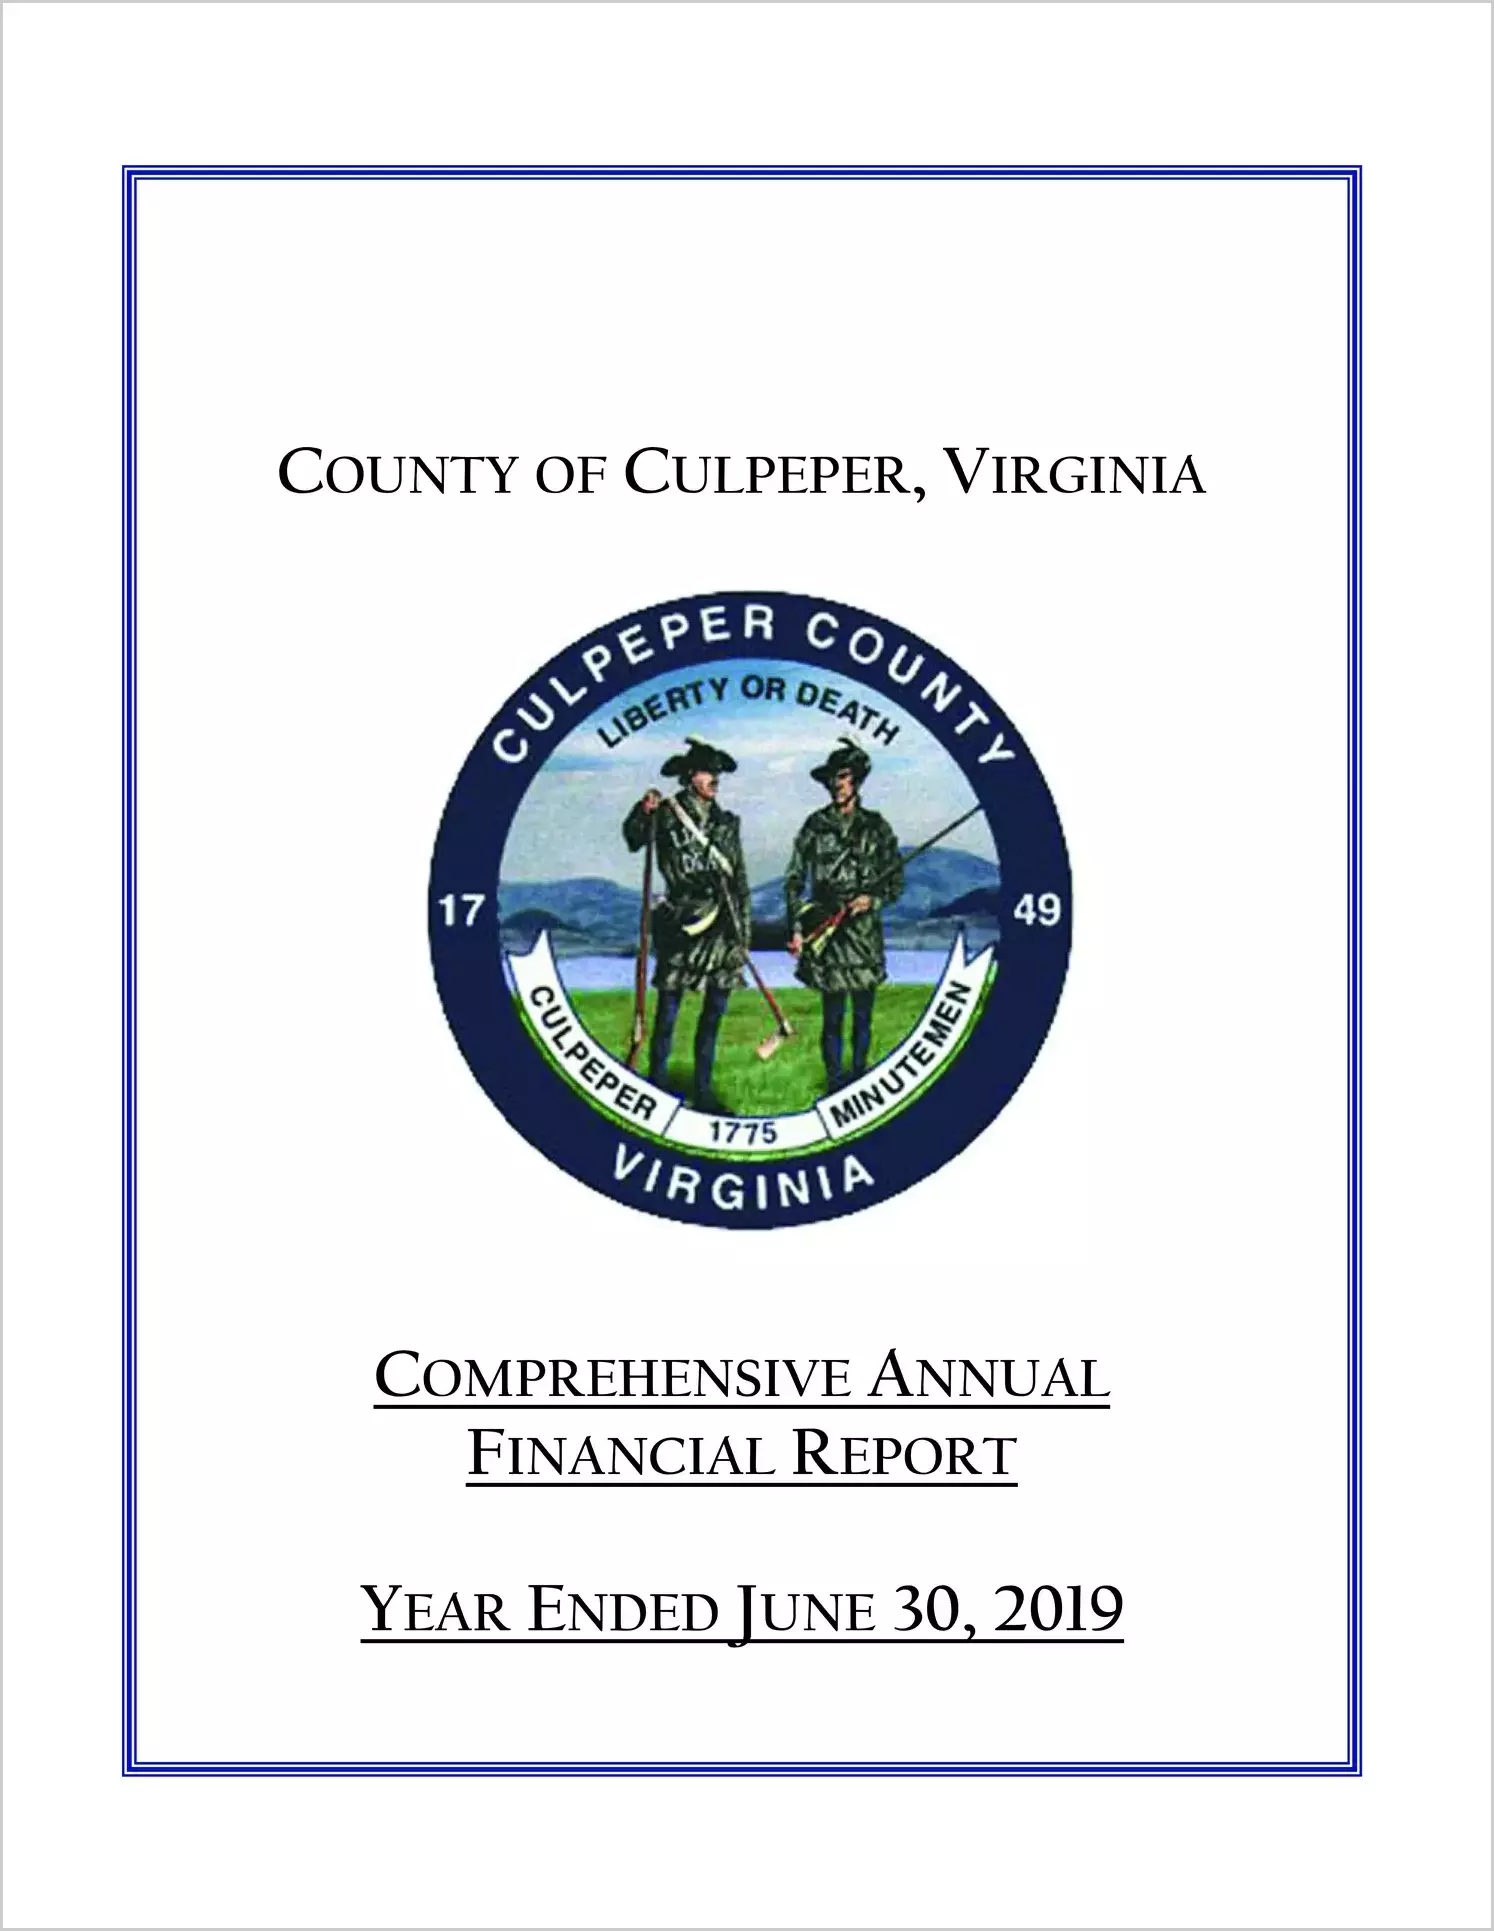 2019 Annual Financial Report for County of Culpeper